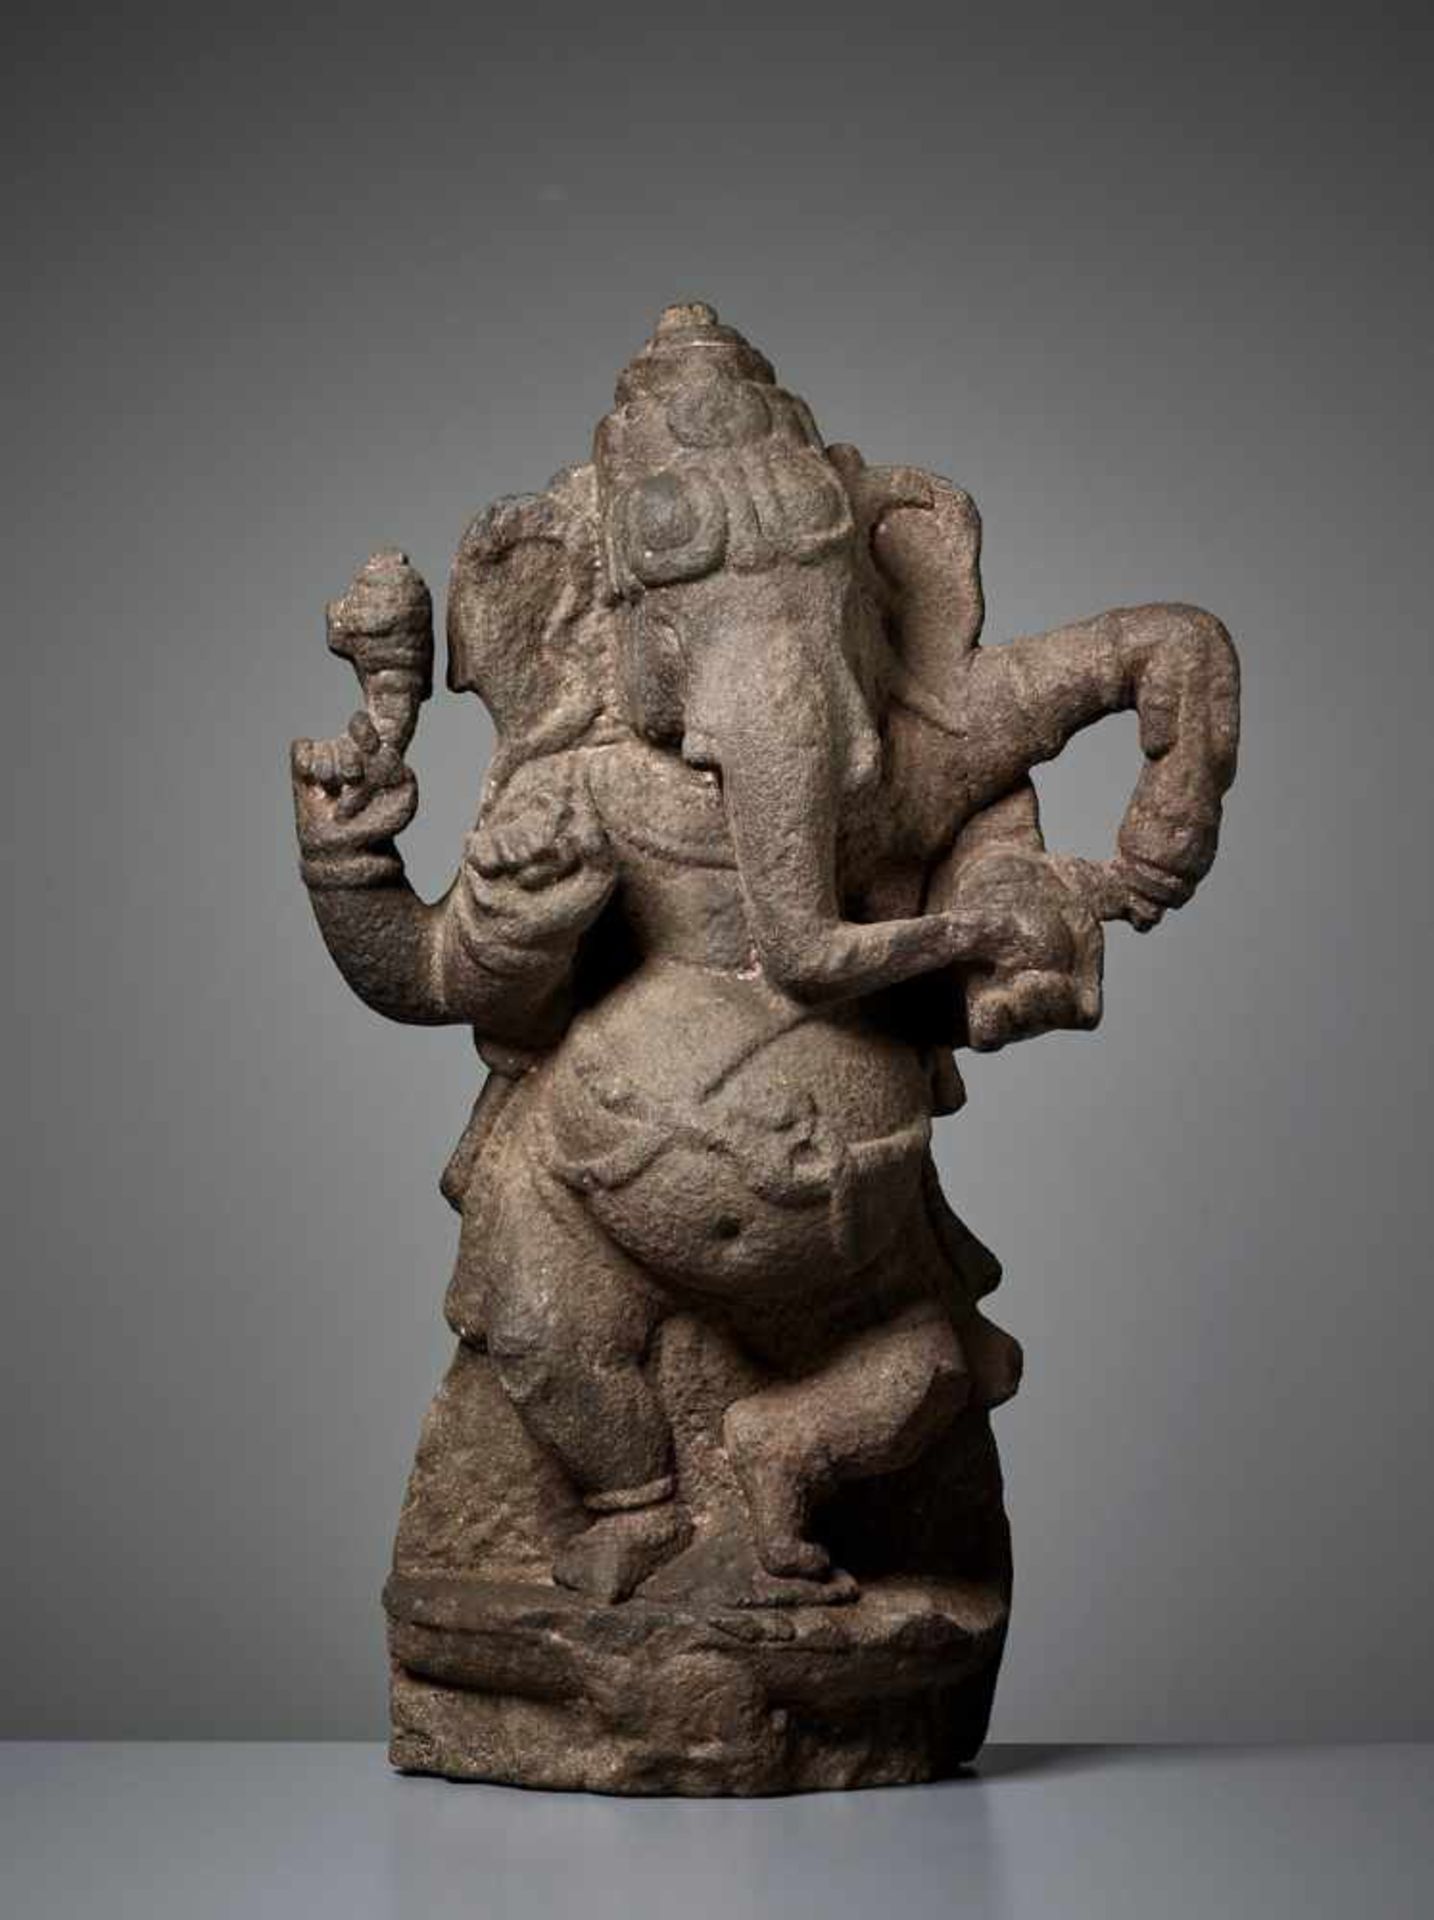 A RARE SANDSTONE STELE OF GANESHA India, 11th – 13th century. Dancing with one leg raised and his